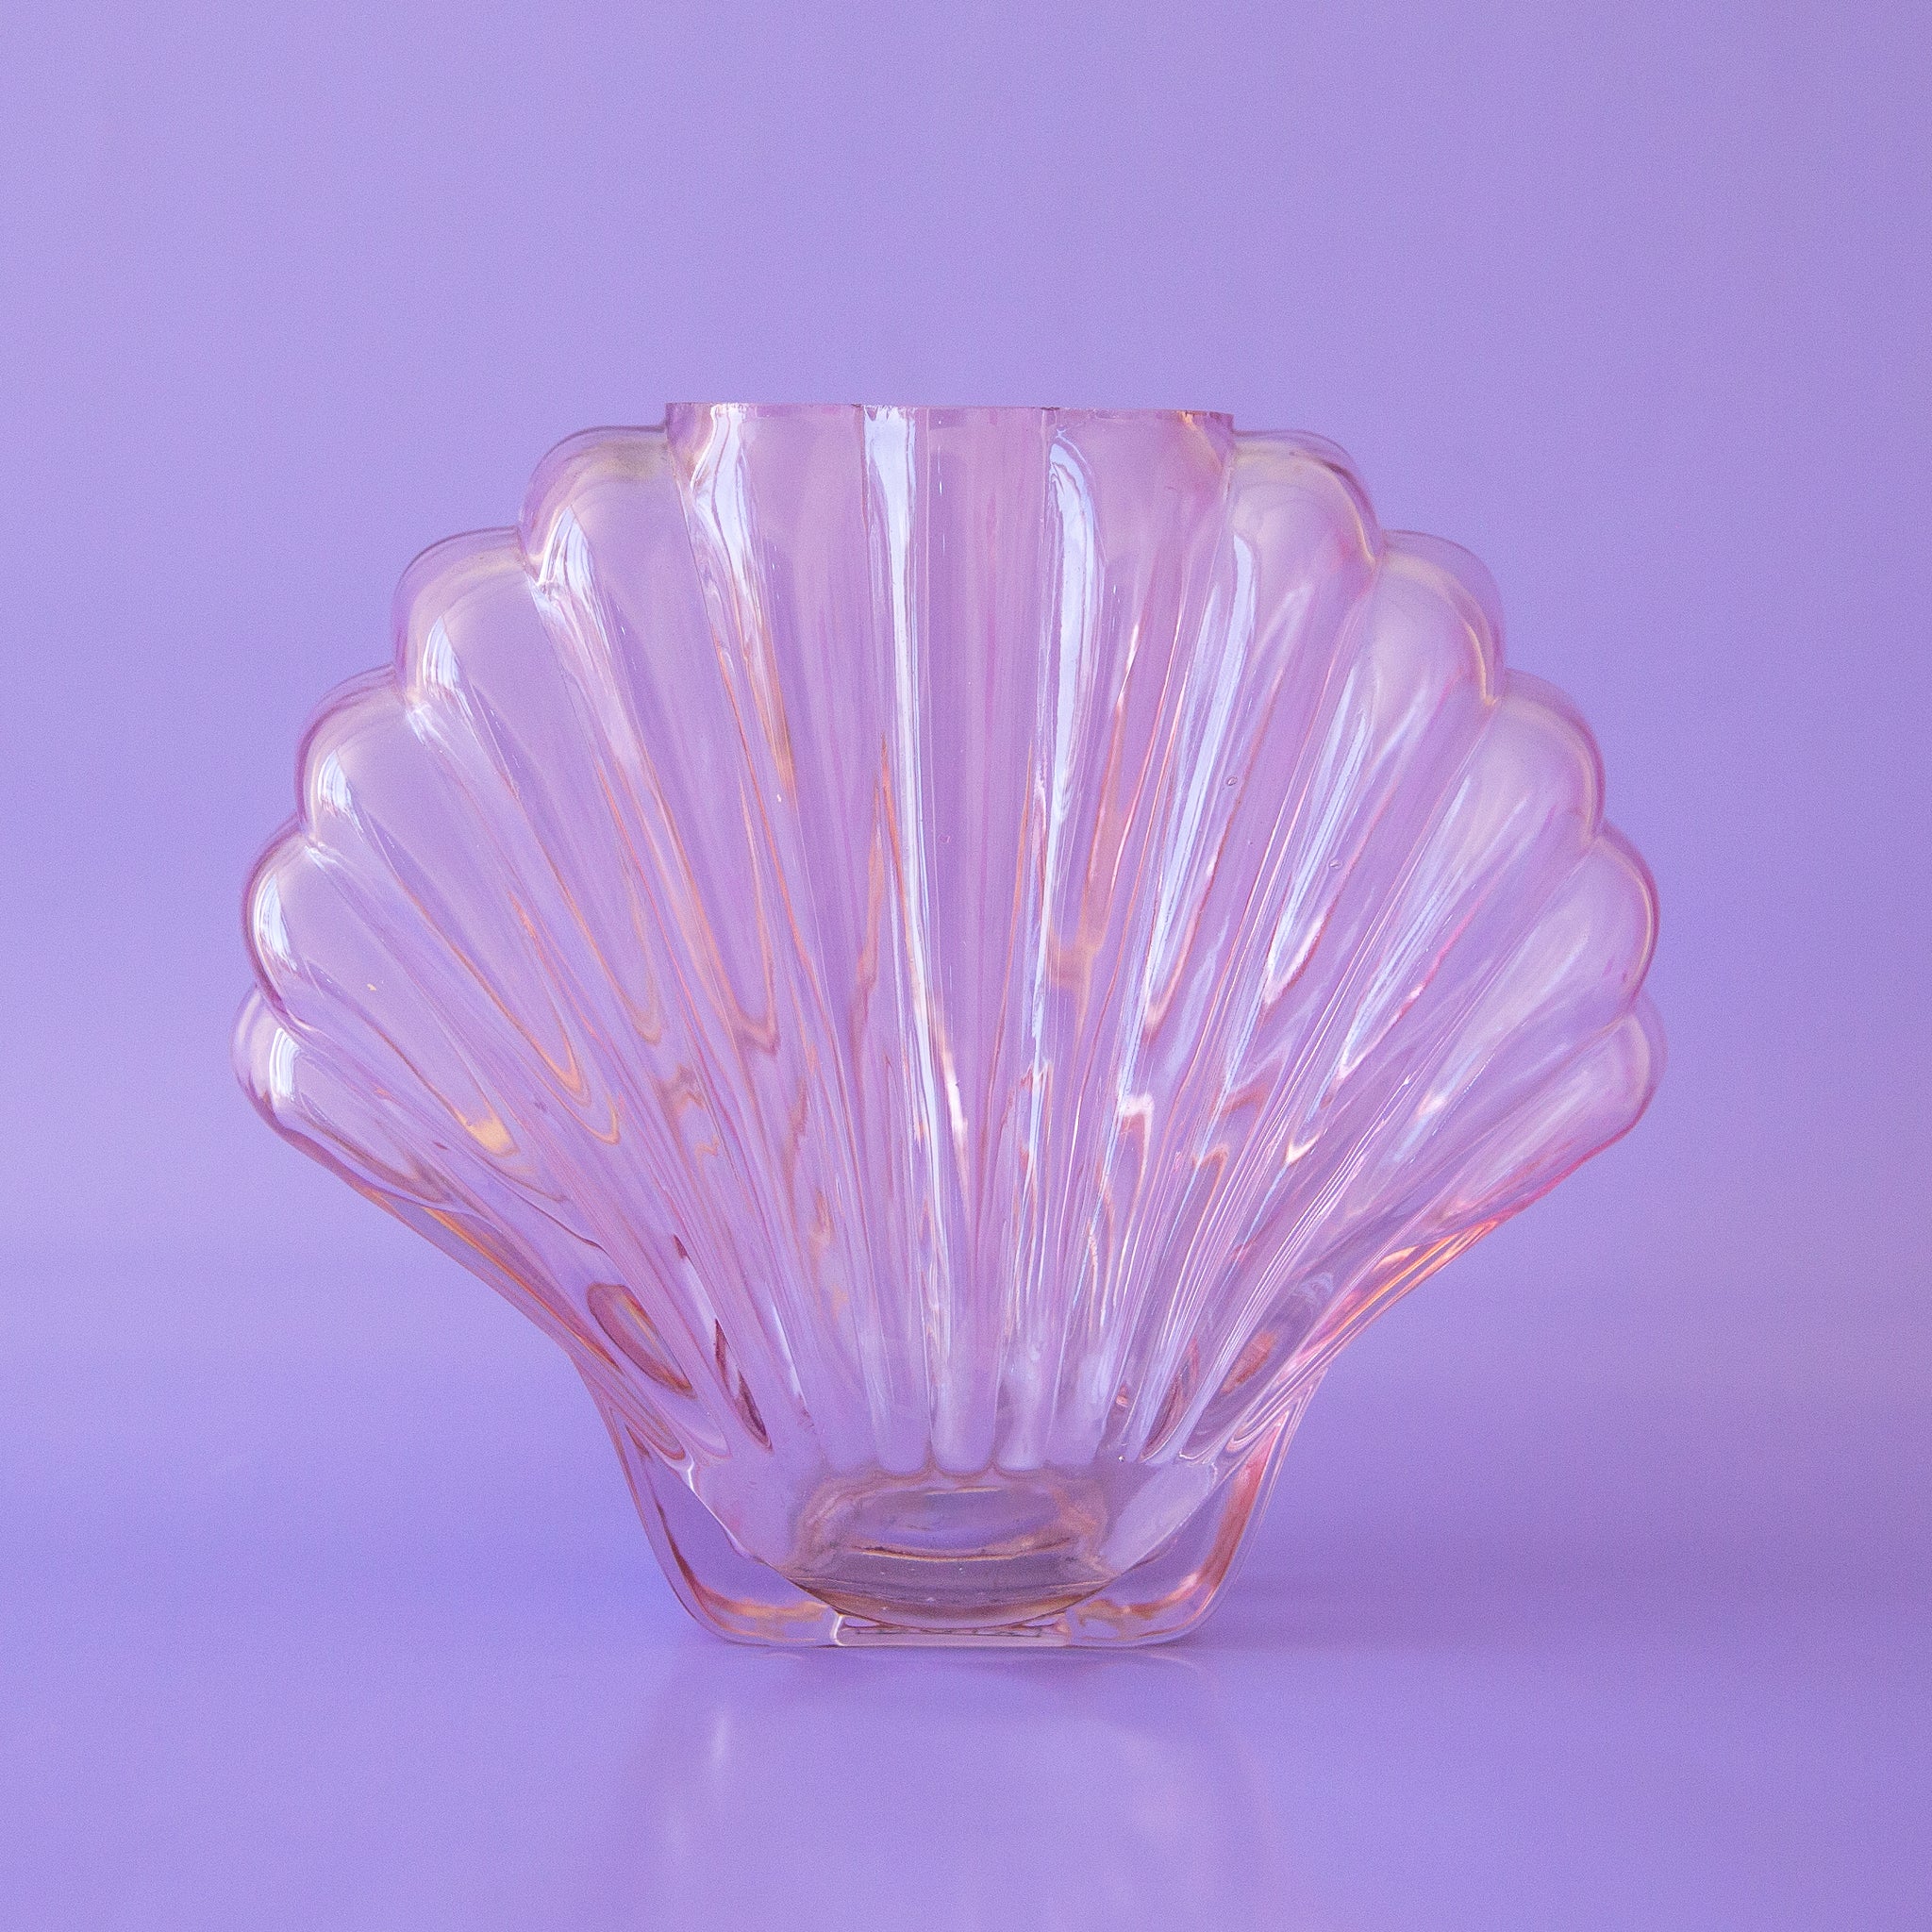 On a purple background is a light pink glass, shell shaped vase